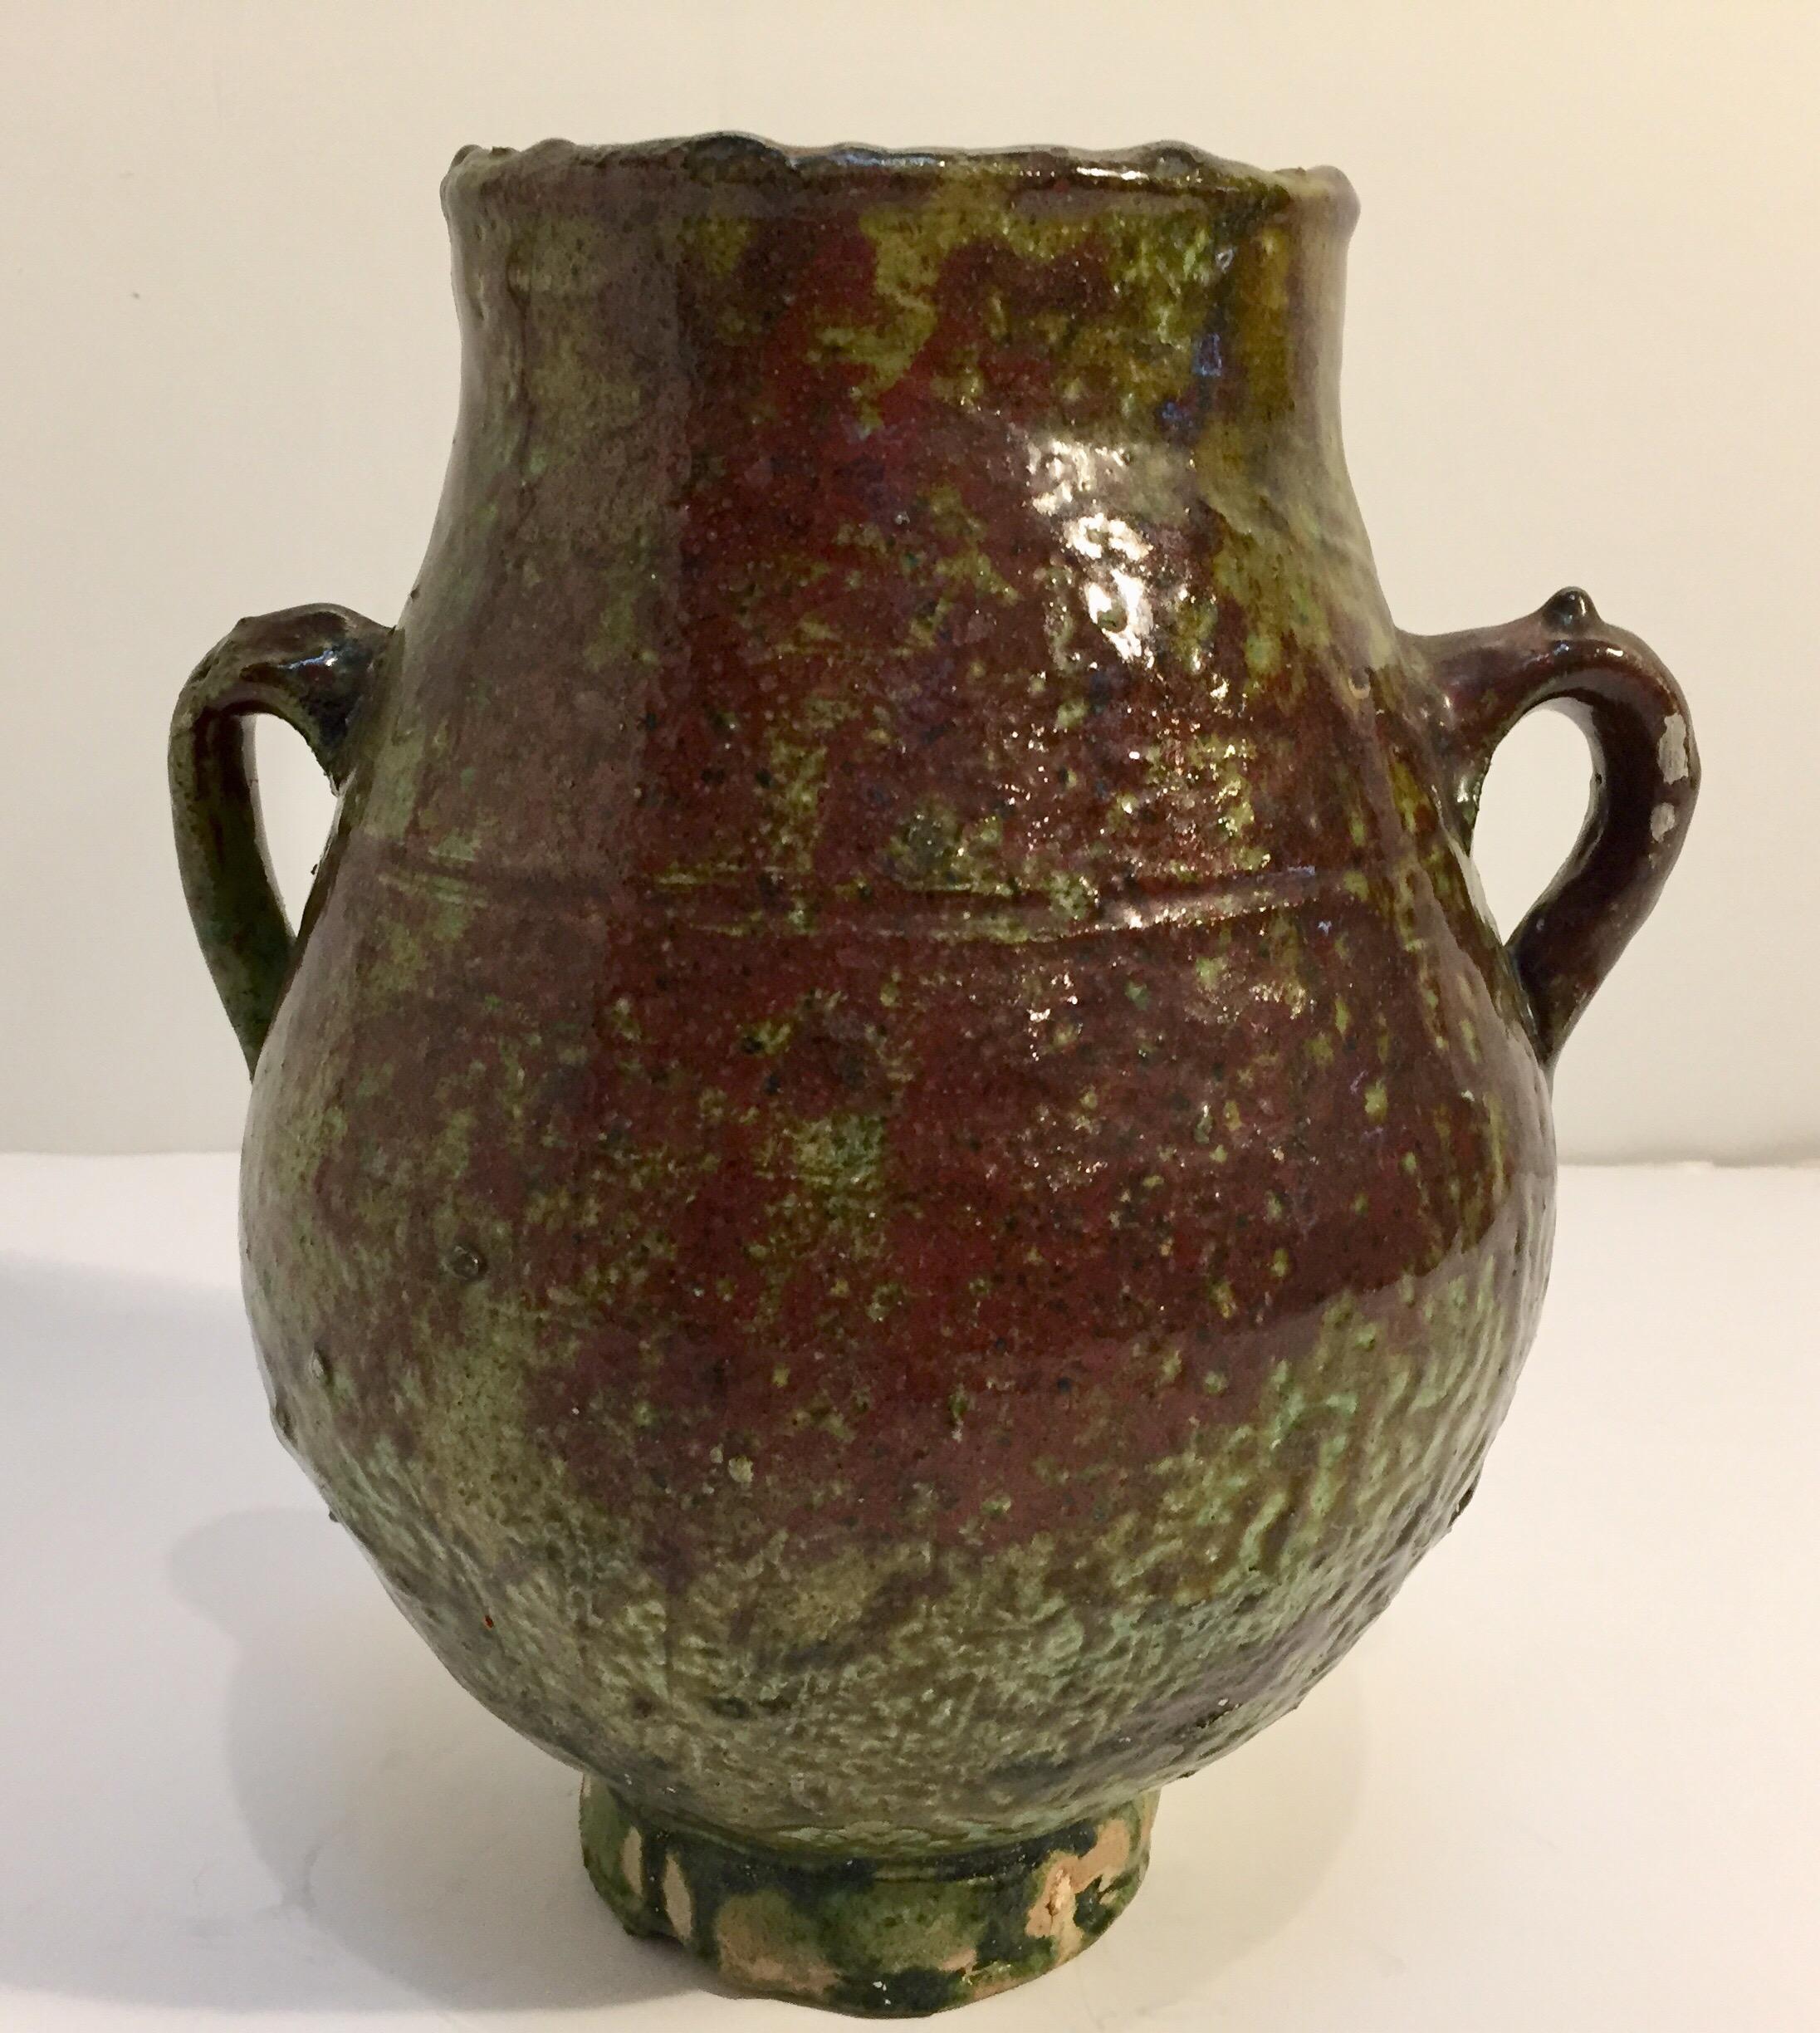 Moroccan Berber green glazed decorative terracotta jar with handles.
Wonderful green shimmering.
These vintage tribal handcrafted green jars were used to store olive oil, vinegar, butter, the larger ones were used for meat and fat.
Size is: 10